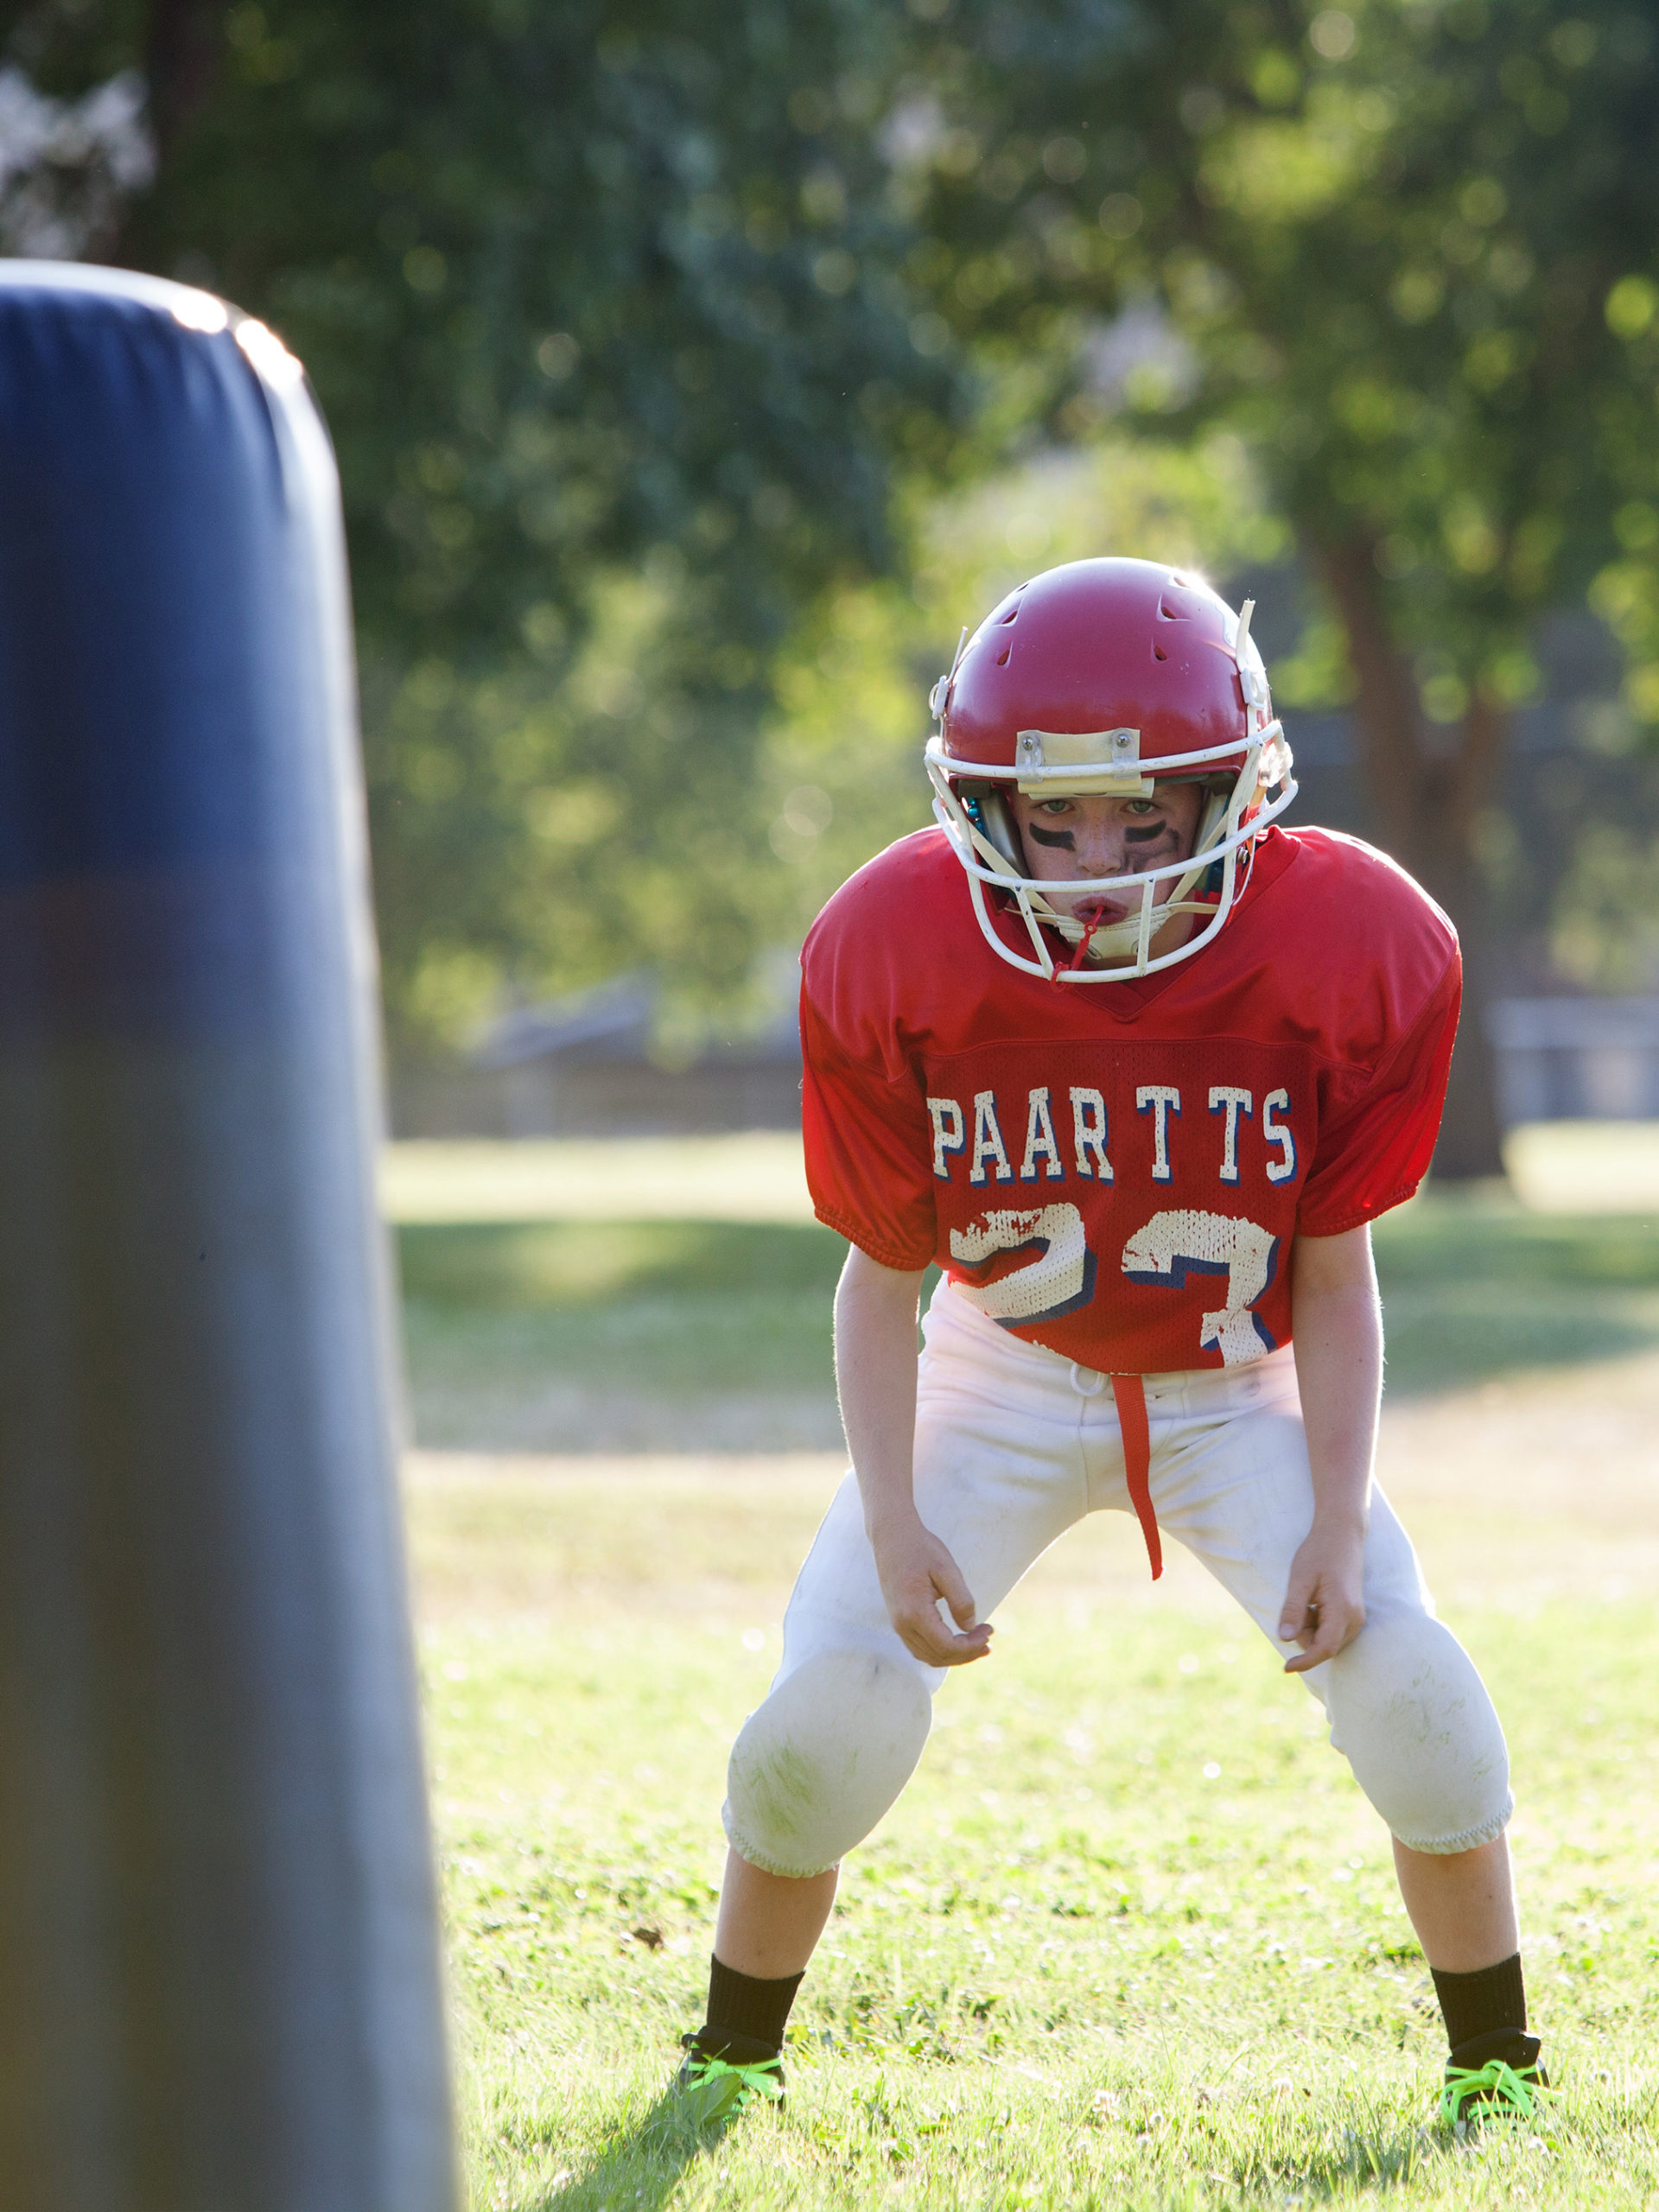 6 do’s and don’ts of concussion